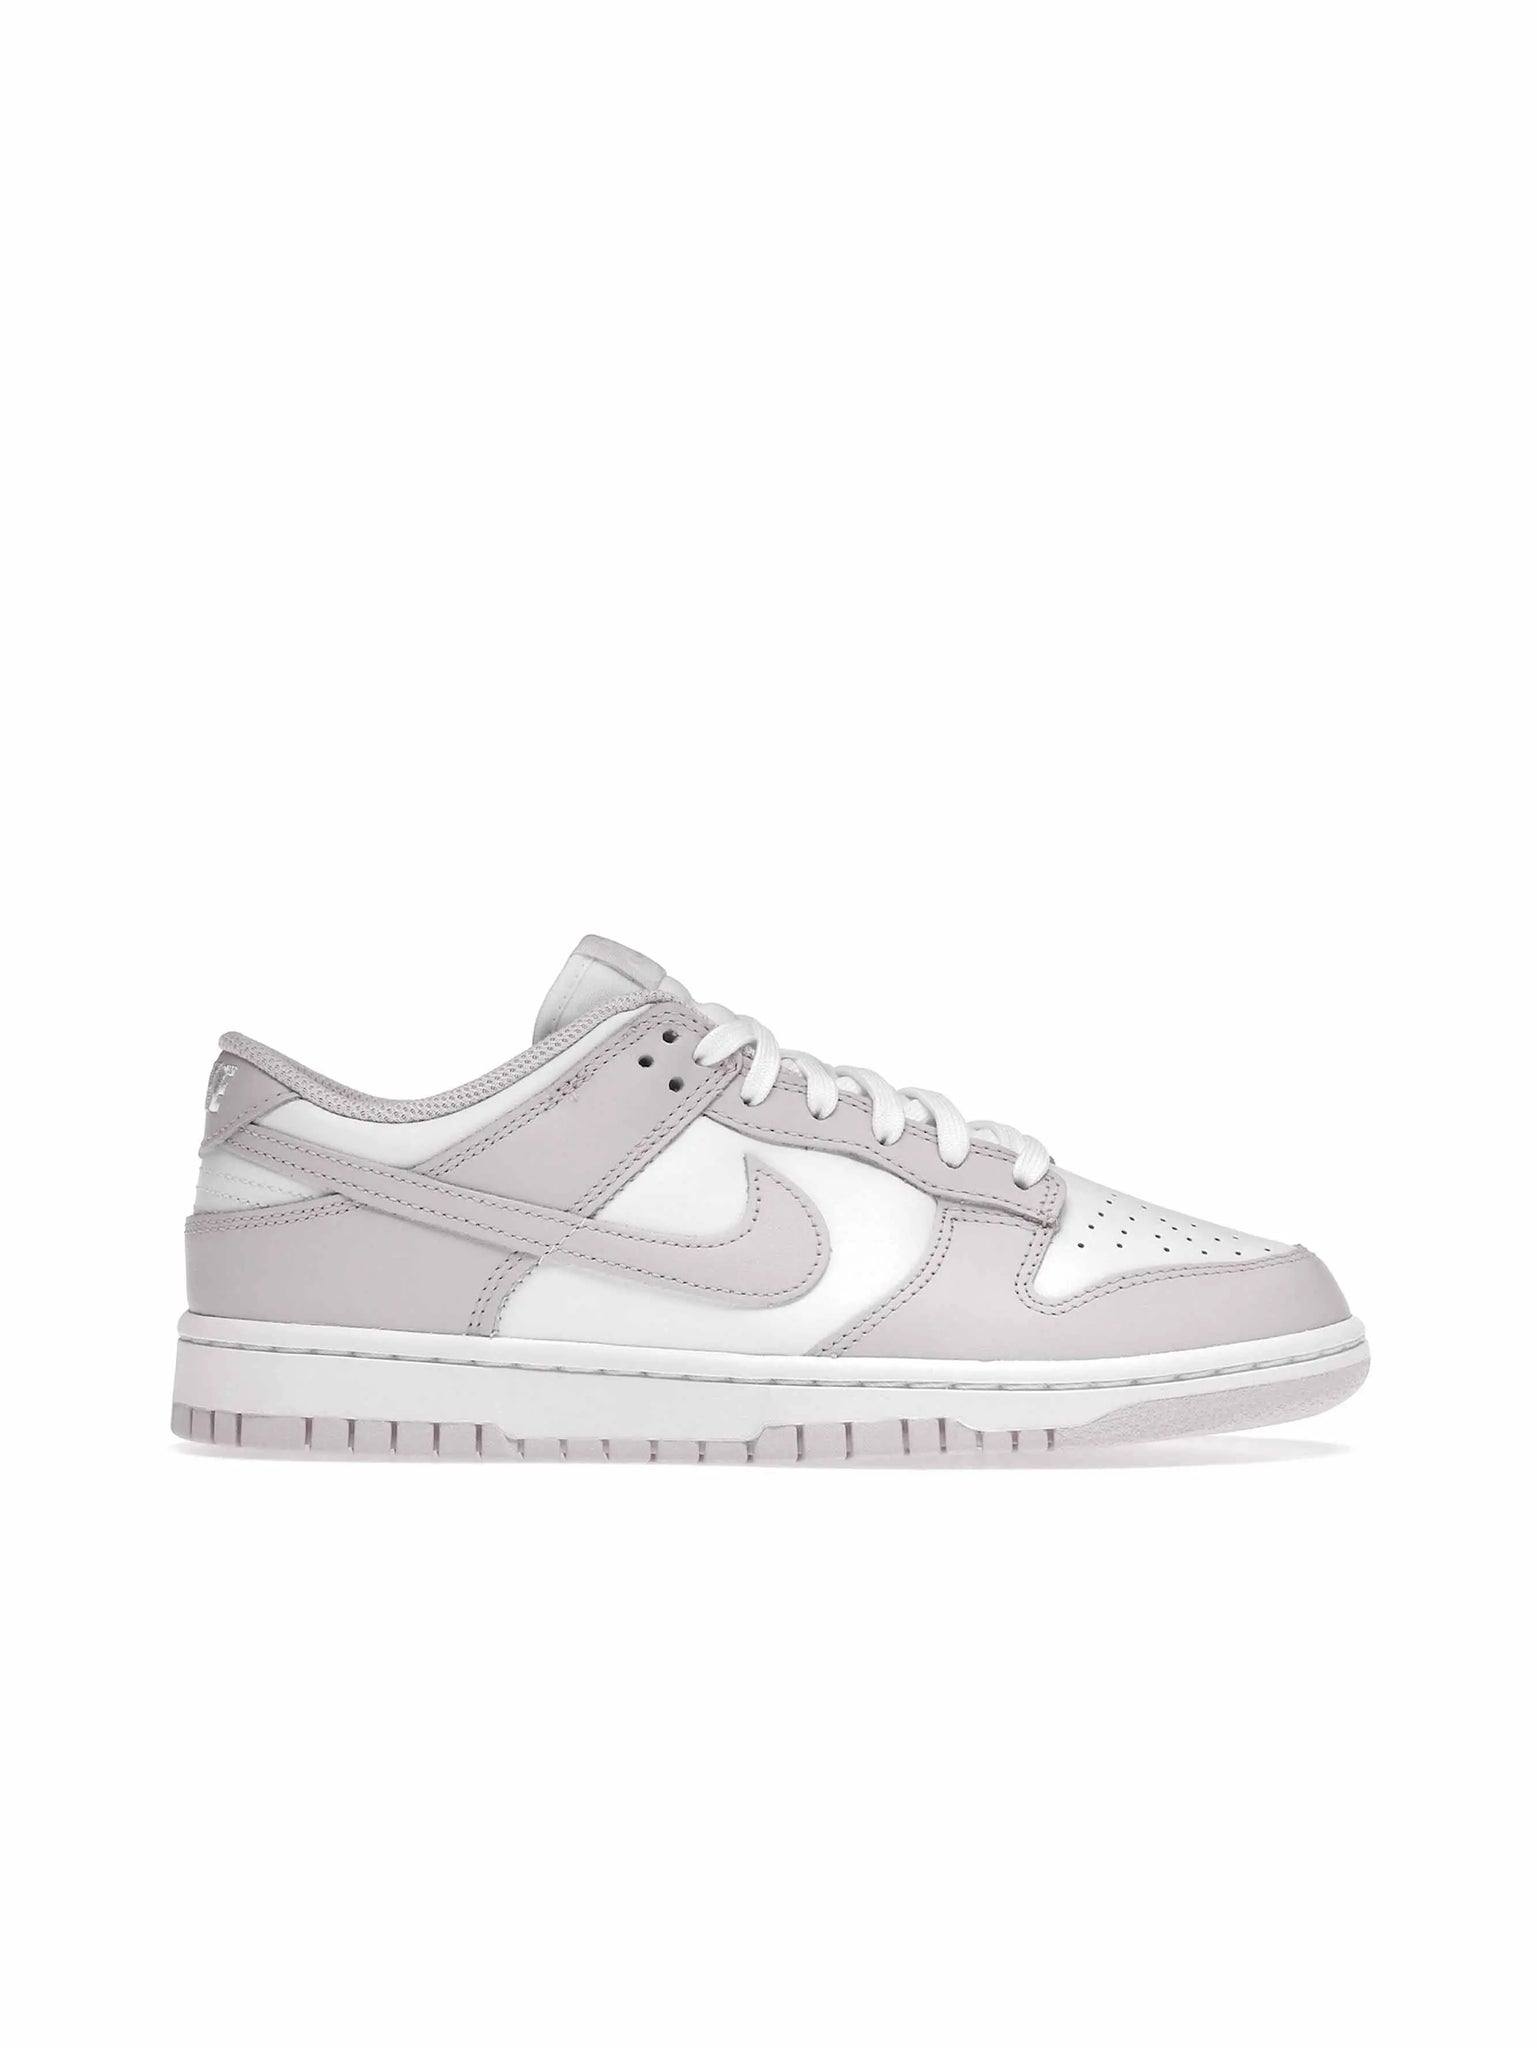 Nike Dunk Low Venice (W) - Prior